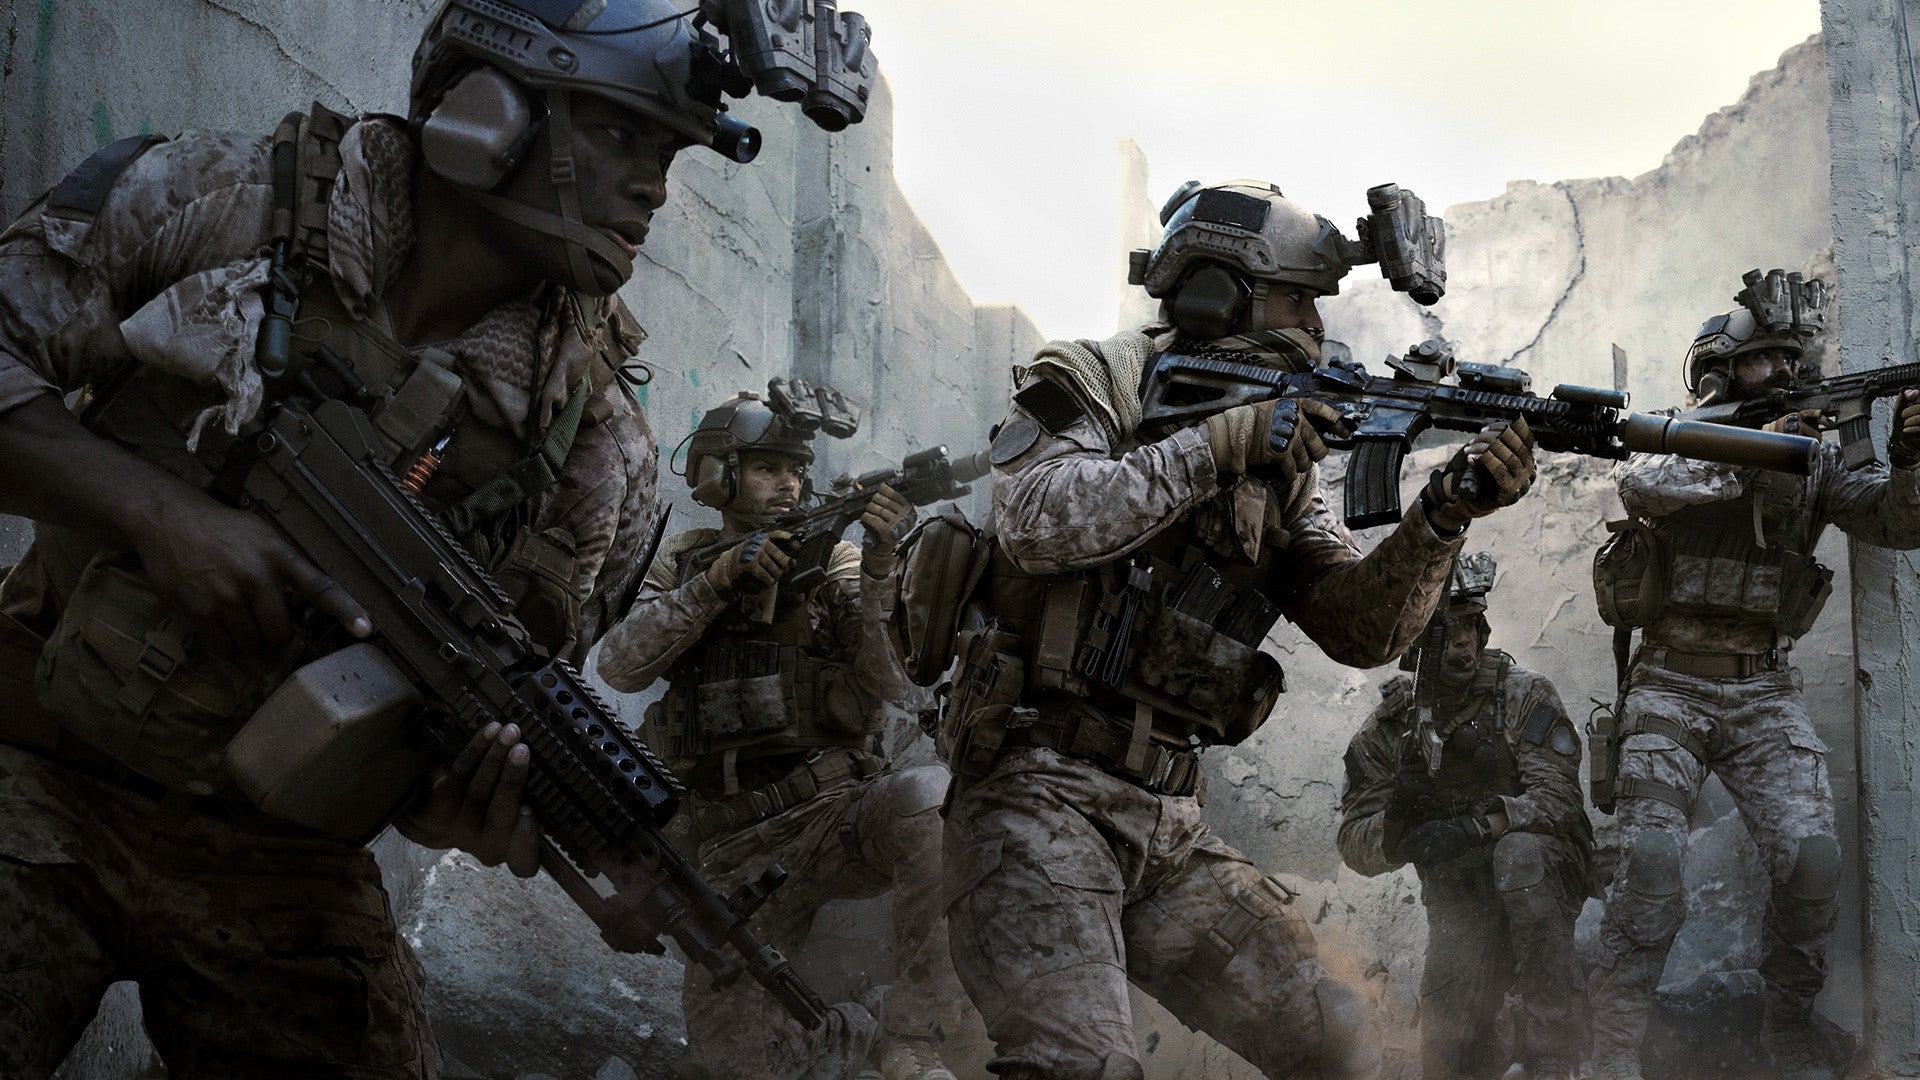 A Modern Warfare Game Option Is PS4 Exclusive Until October 2020